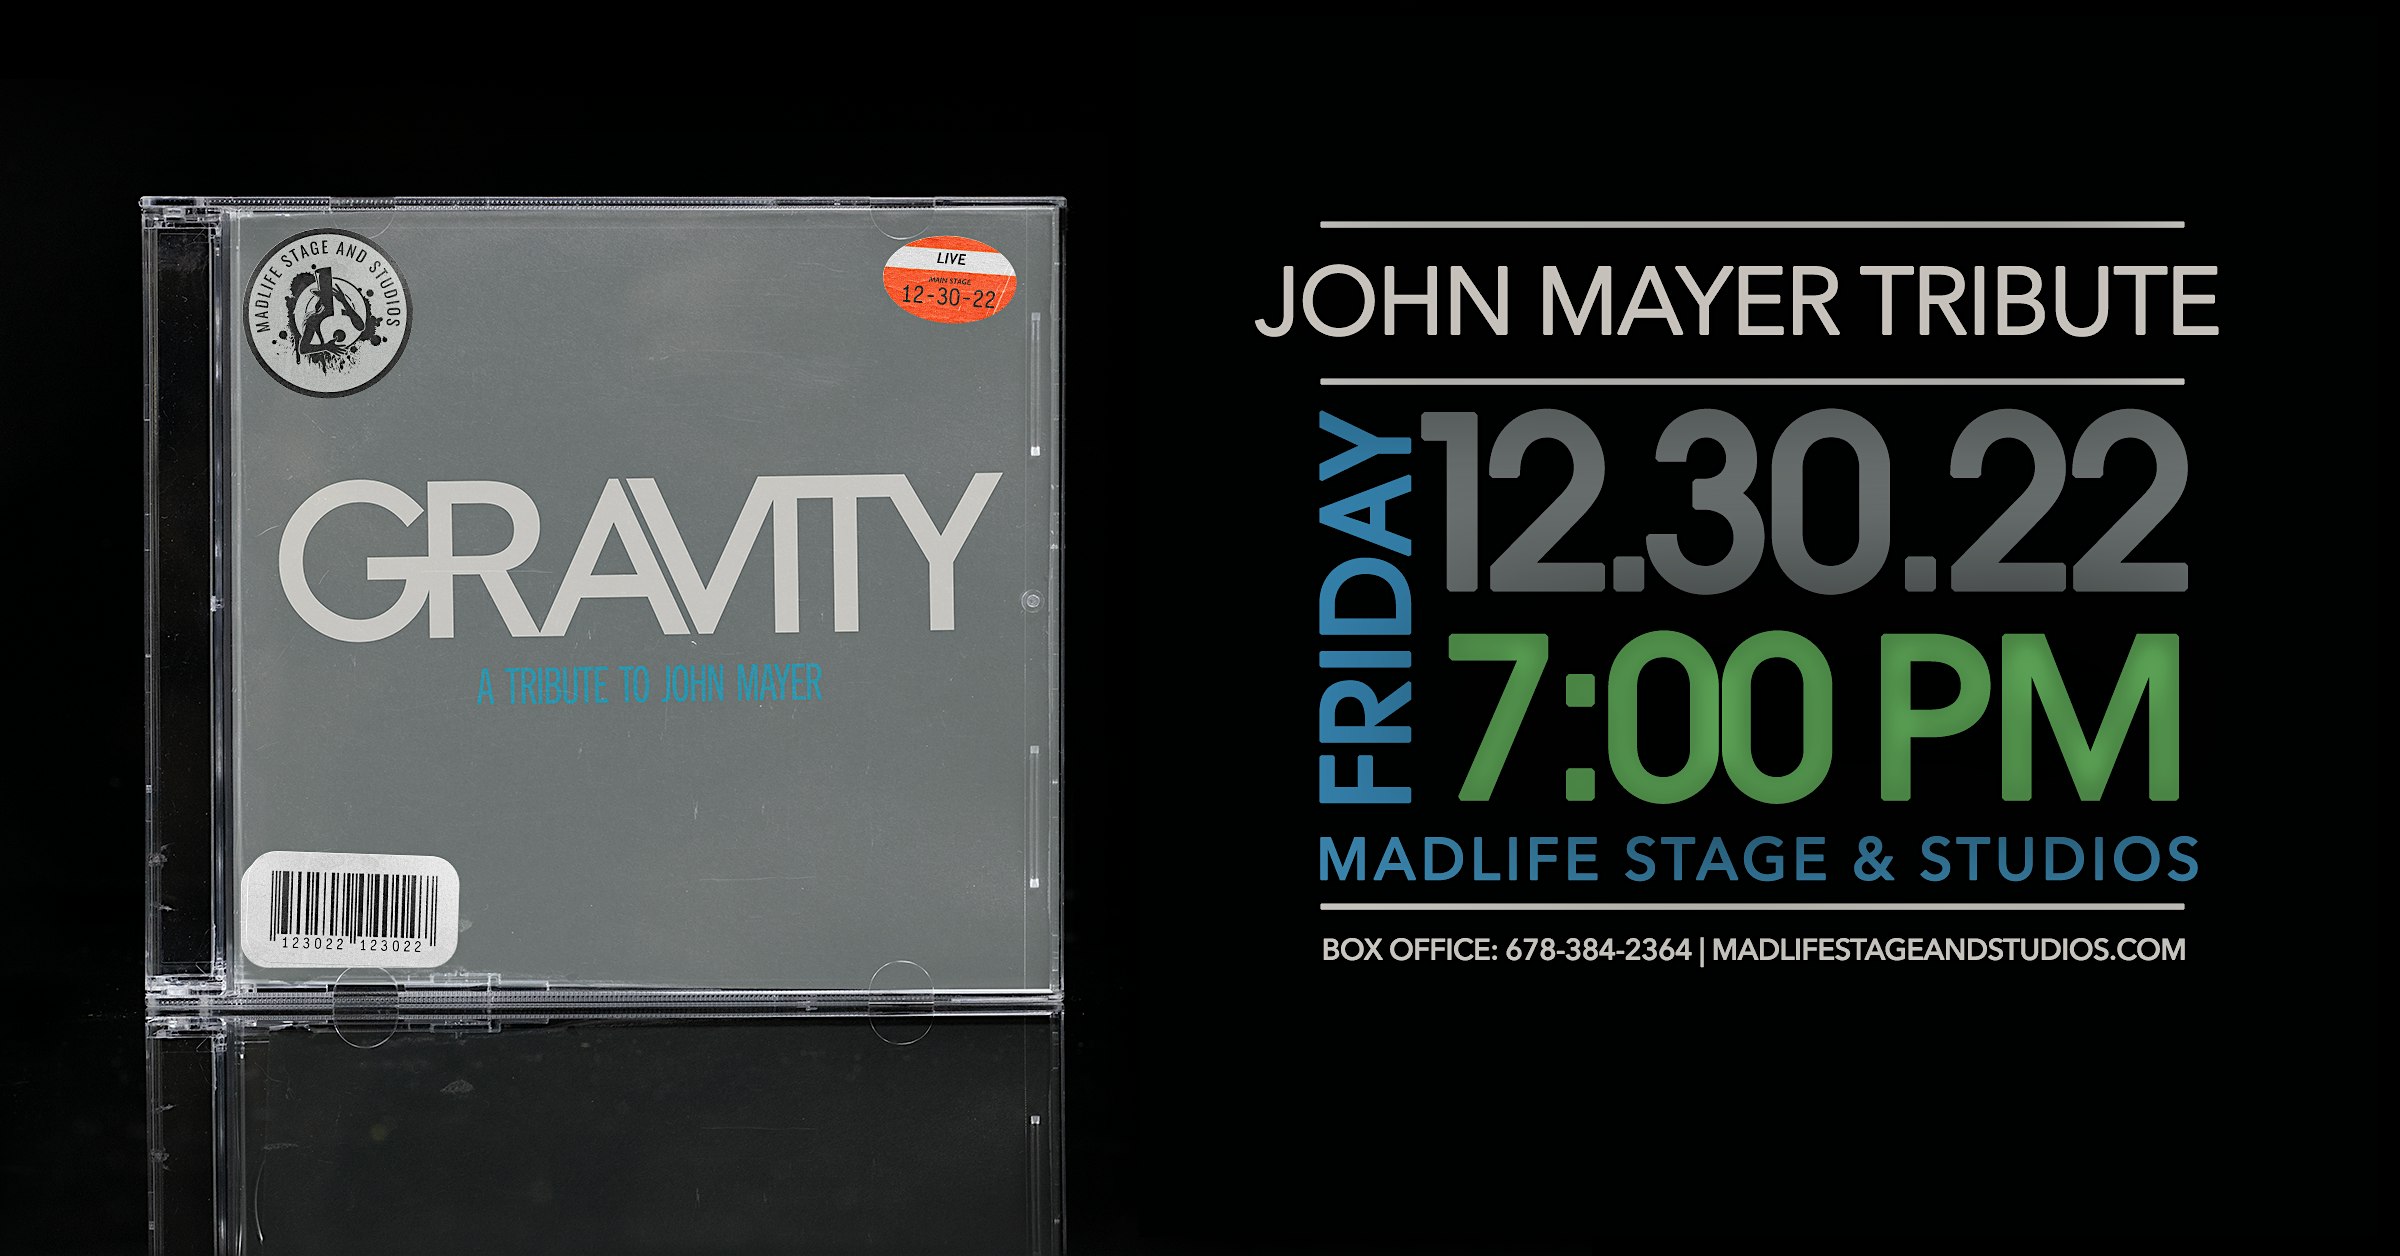 “Gravity” A Tribute to John Mayer presented by Stratton James